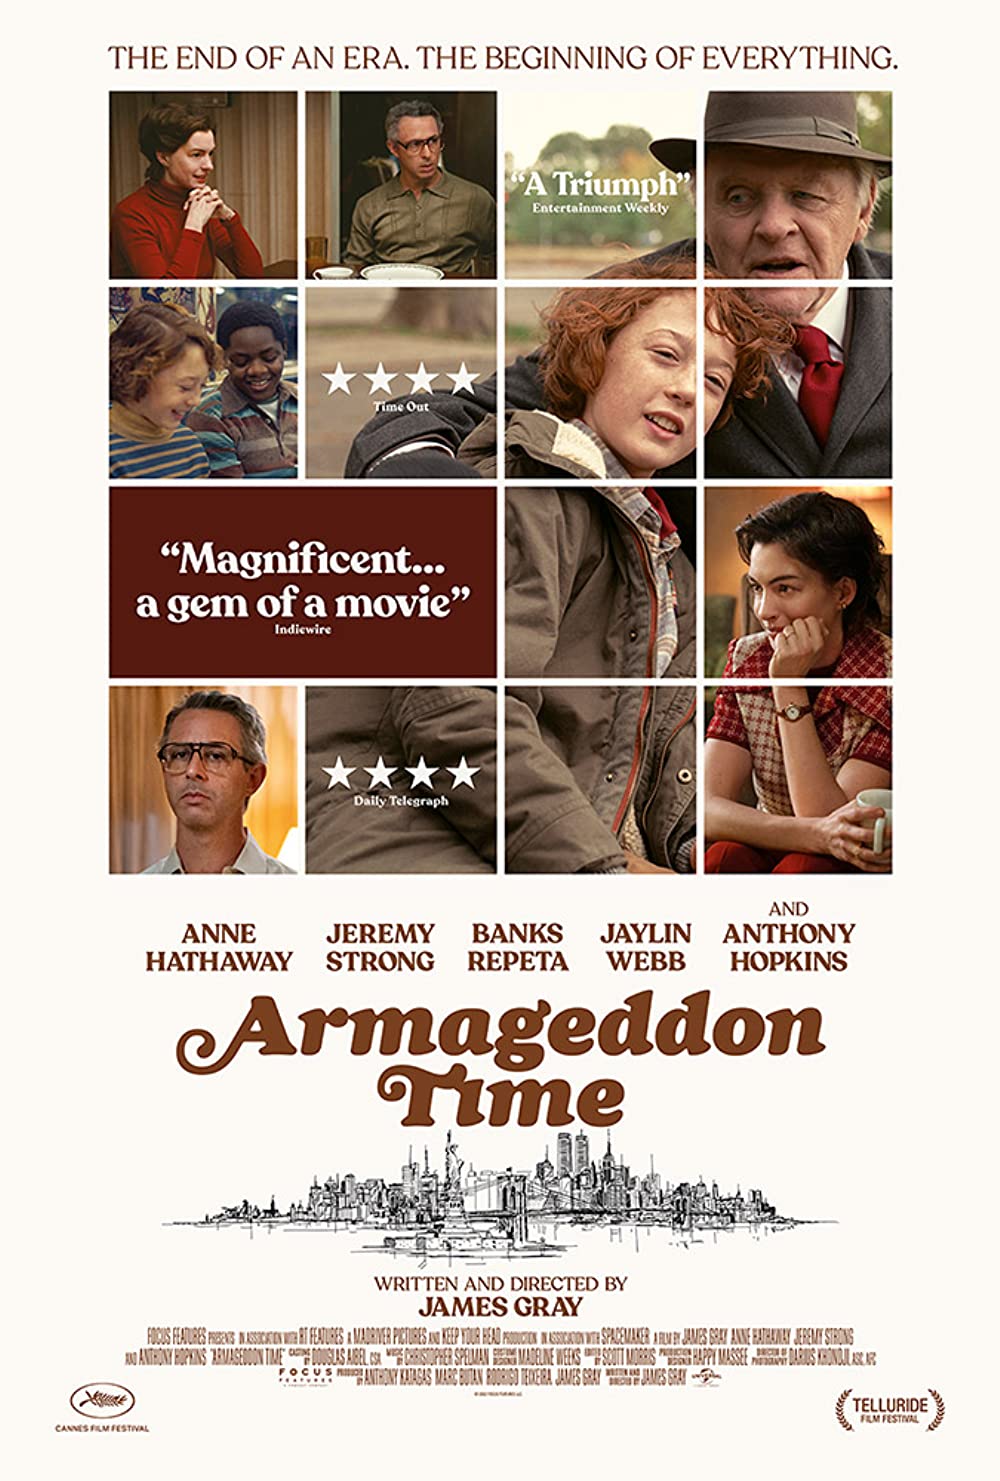 The Cinema Spot talks about the music in James Gray's coming-of-age drama, Armageddon Time